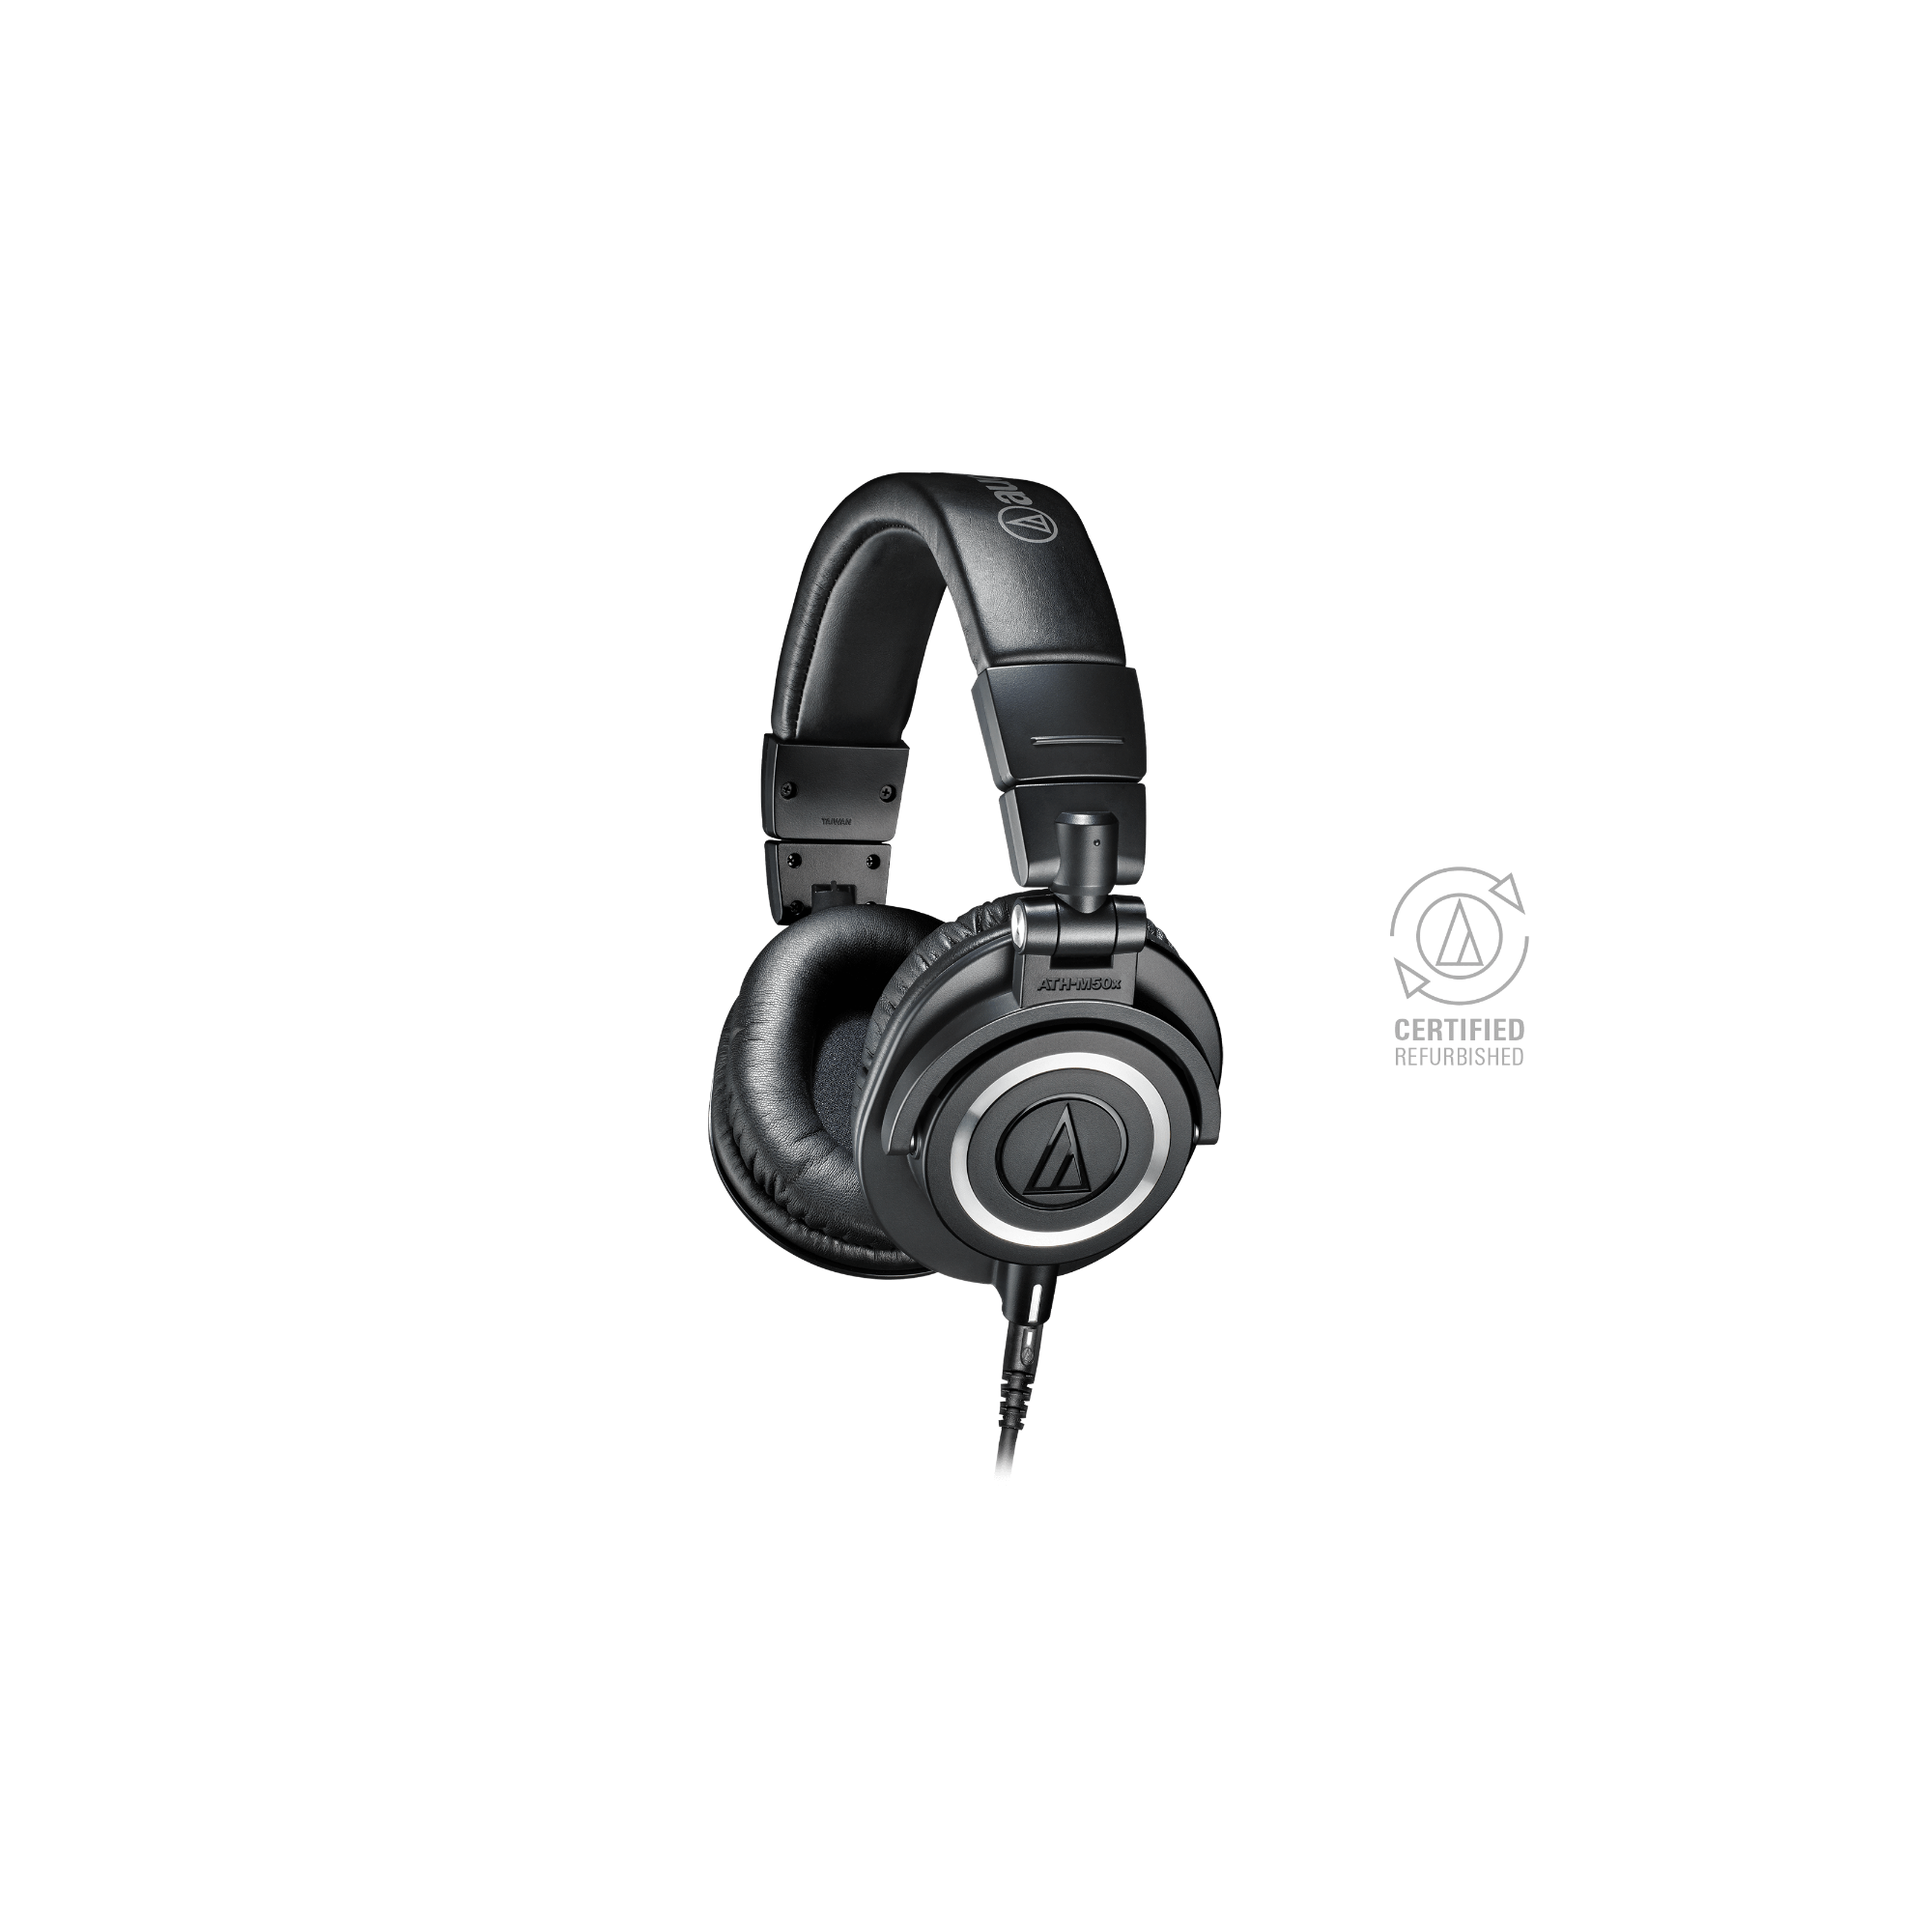 Professional monitor headphones | ATH-M50x-CR Certified 